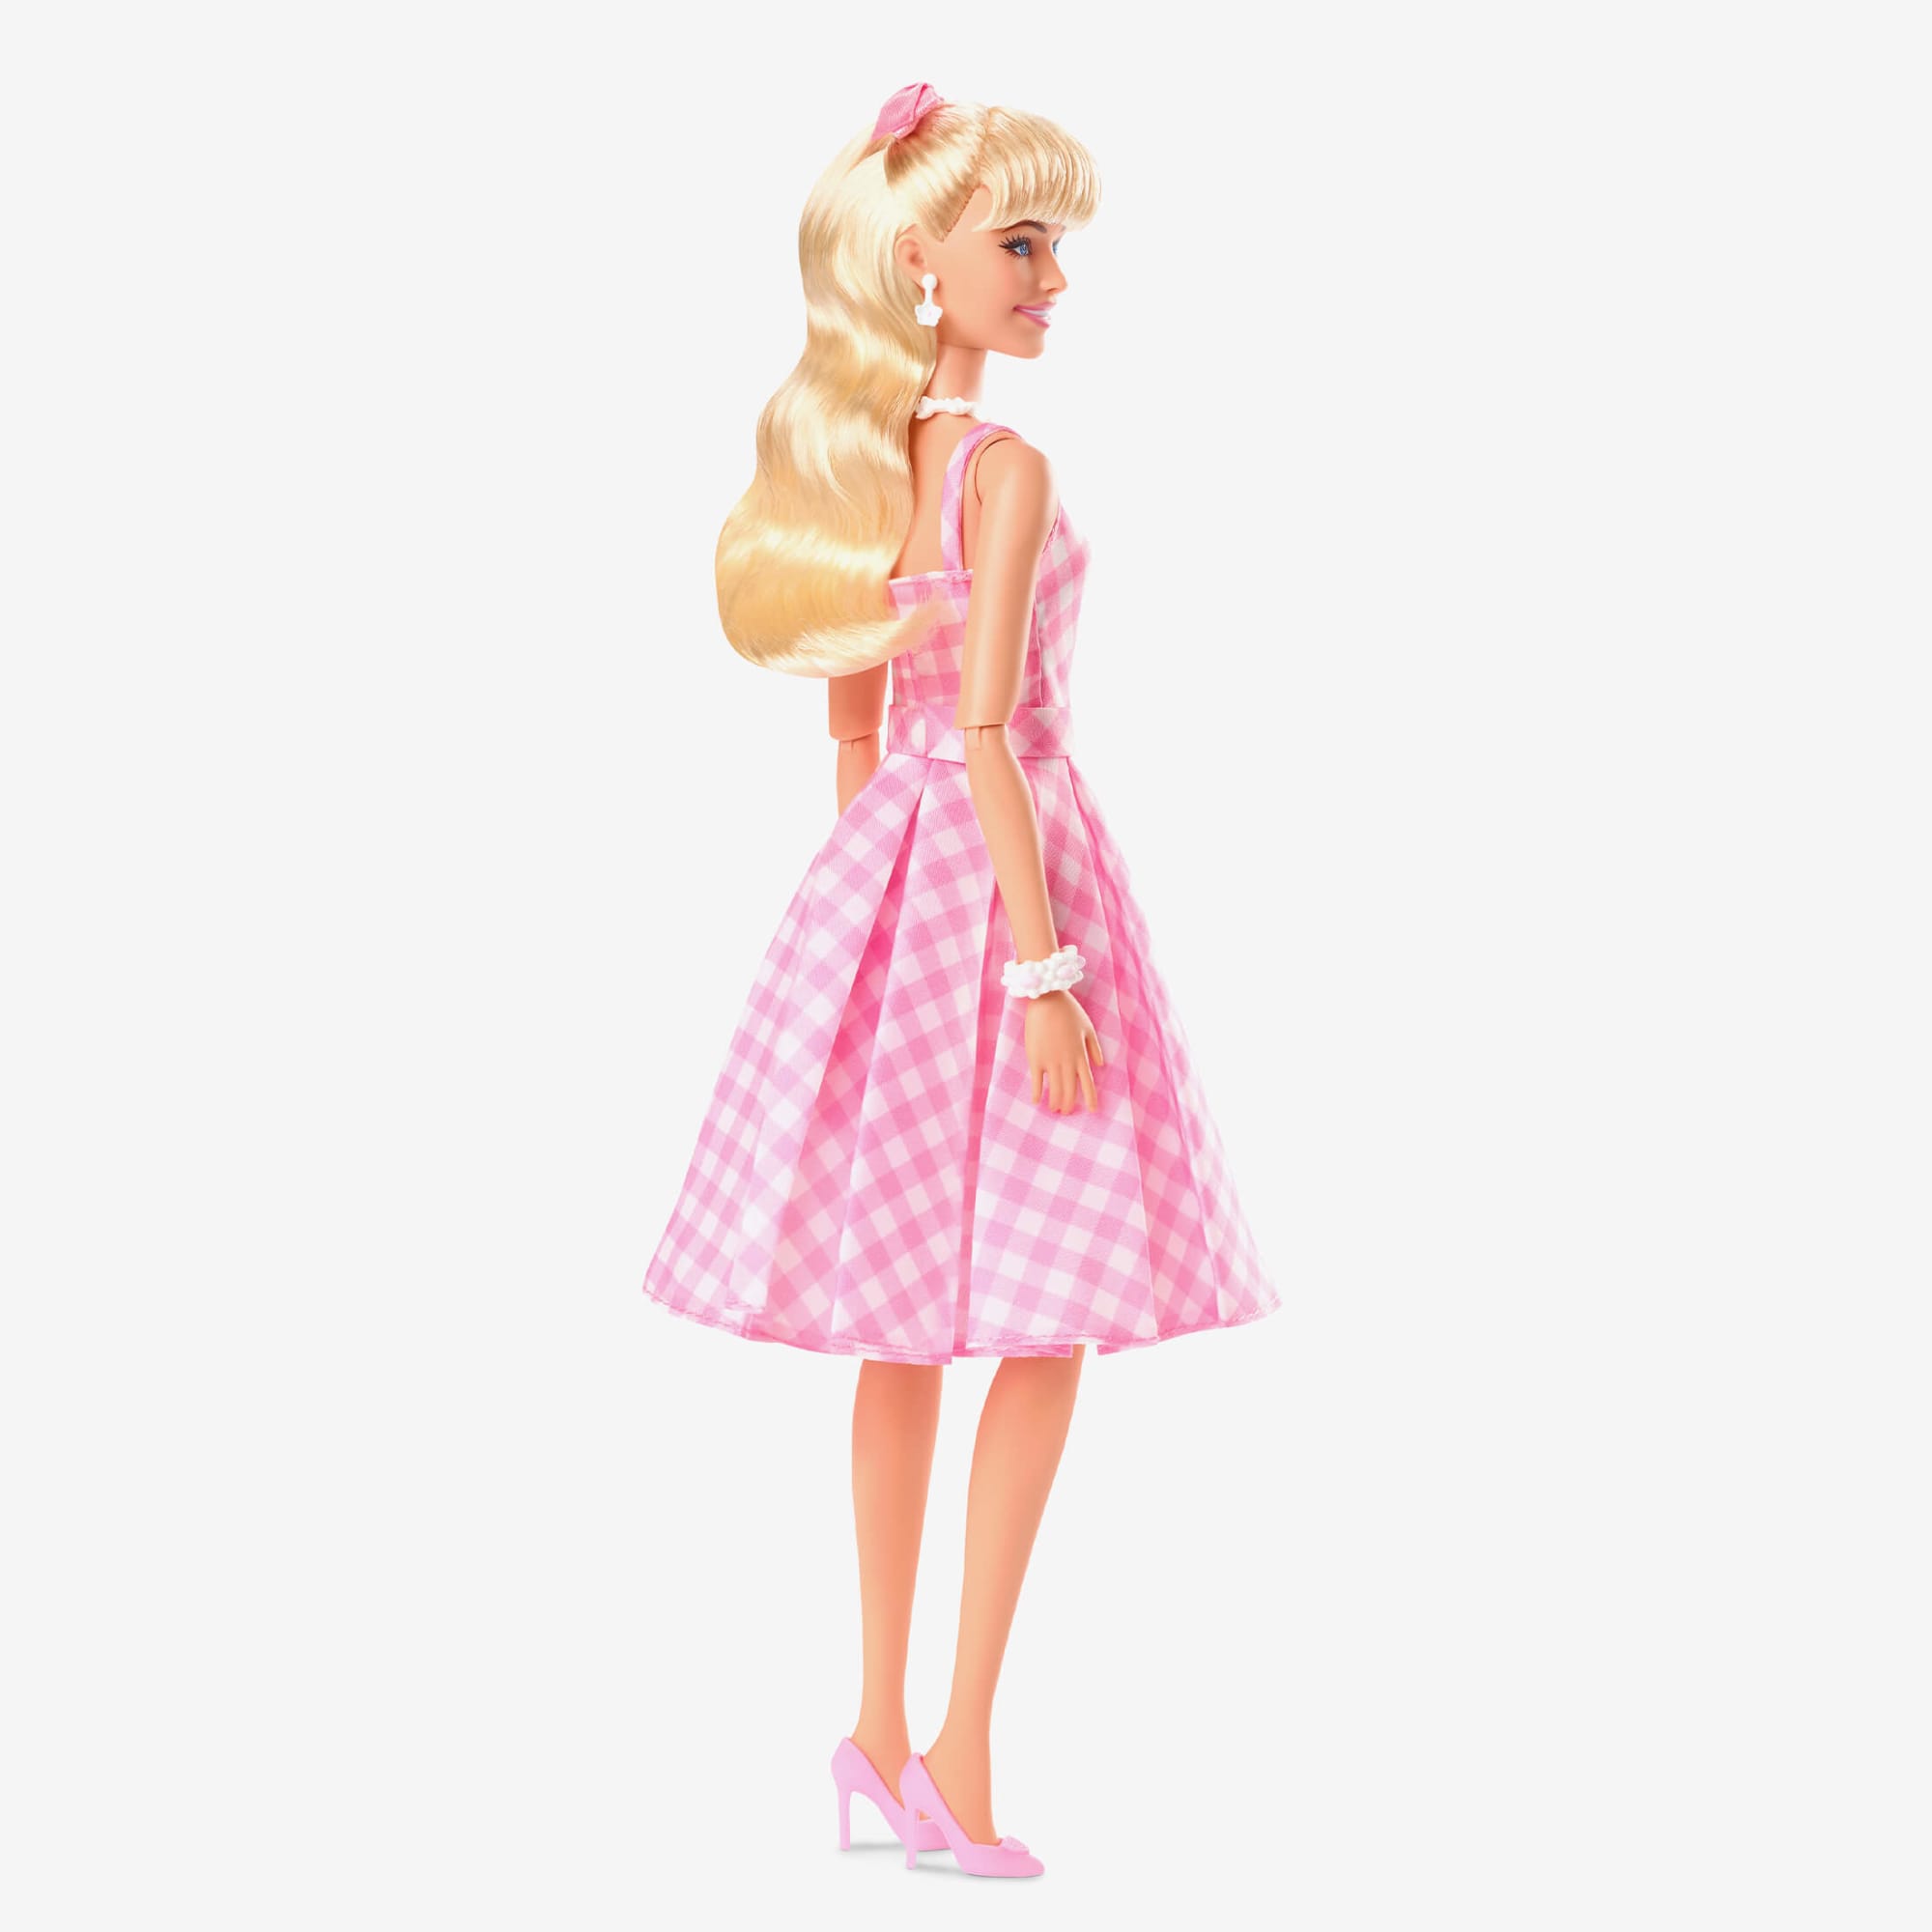 Barbie Daisy Cafe 2003 Mattel Pink Red Daisy Print Dress Doll Toy Movie